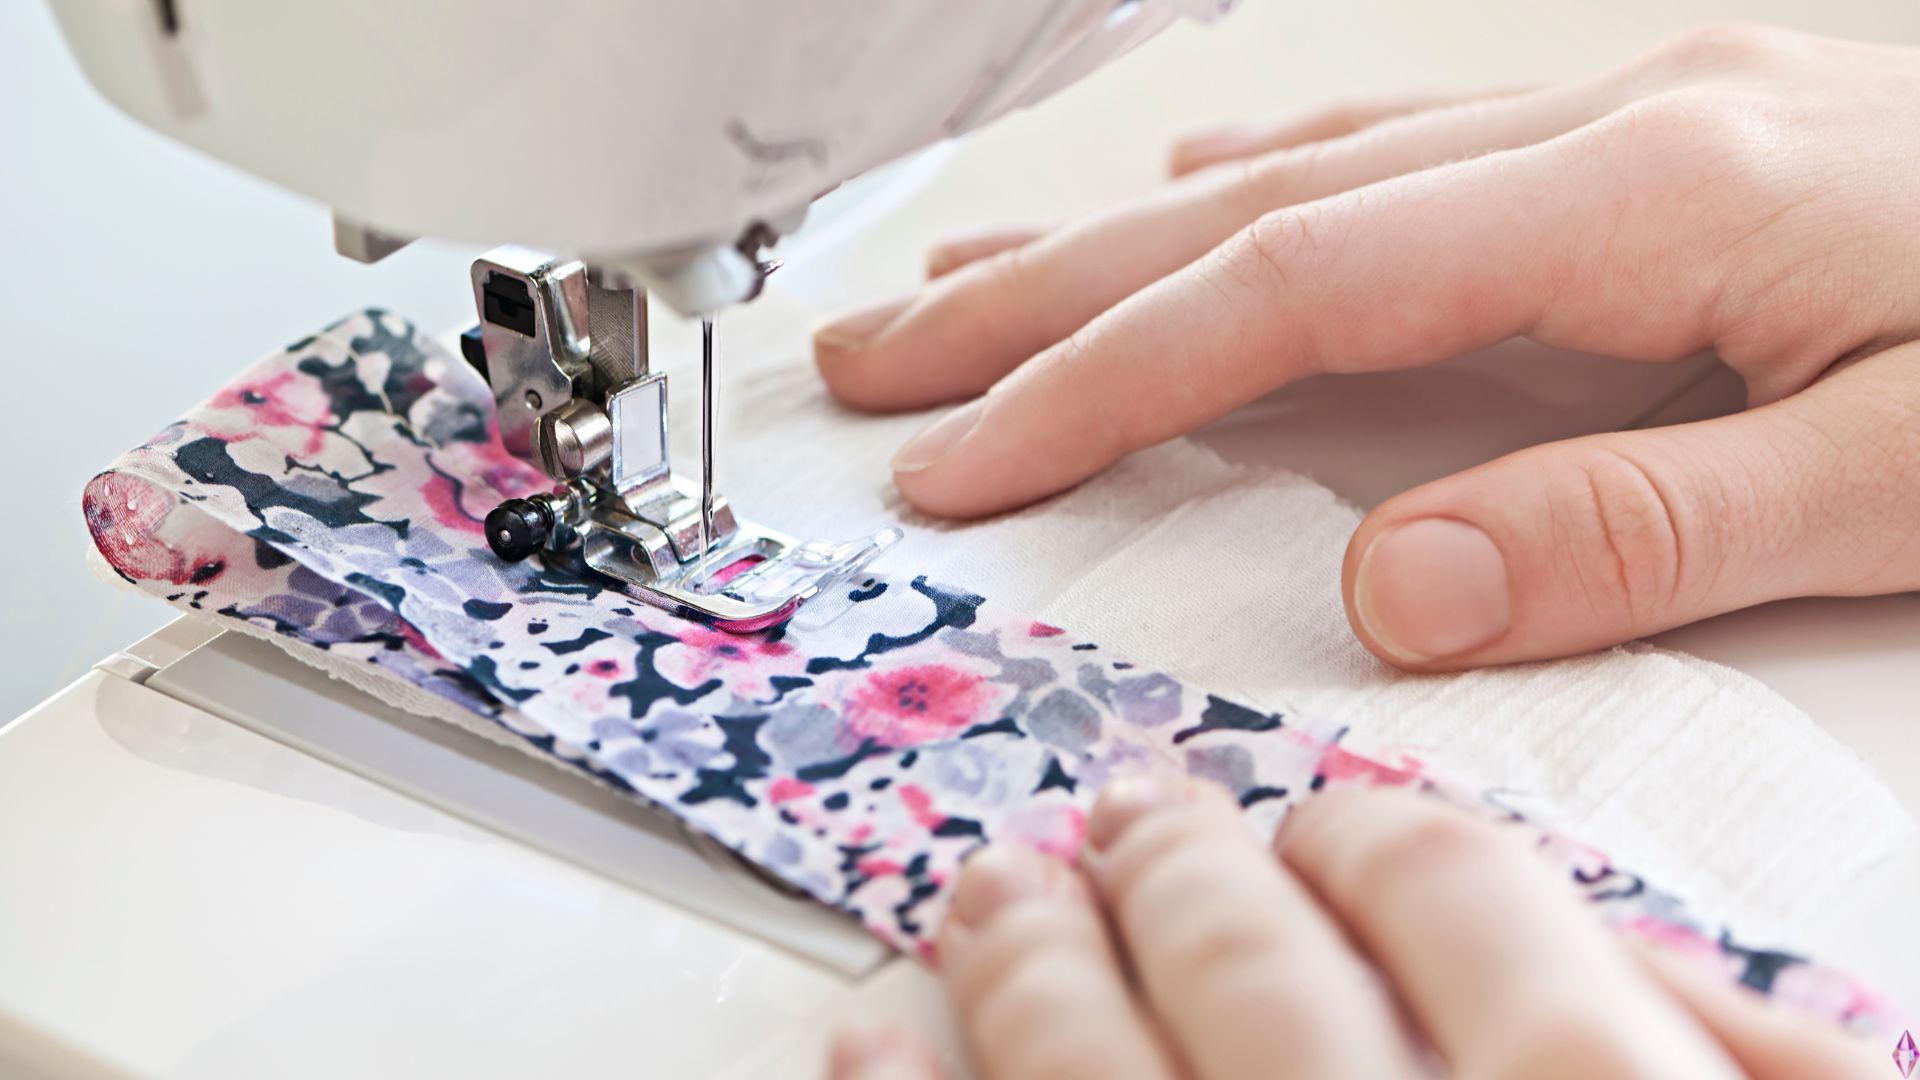 Types Of Sewing Stitches